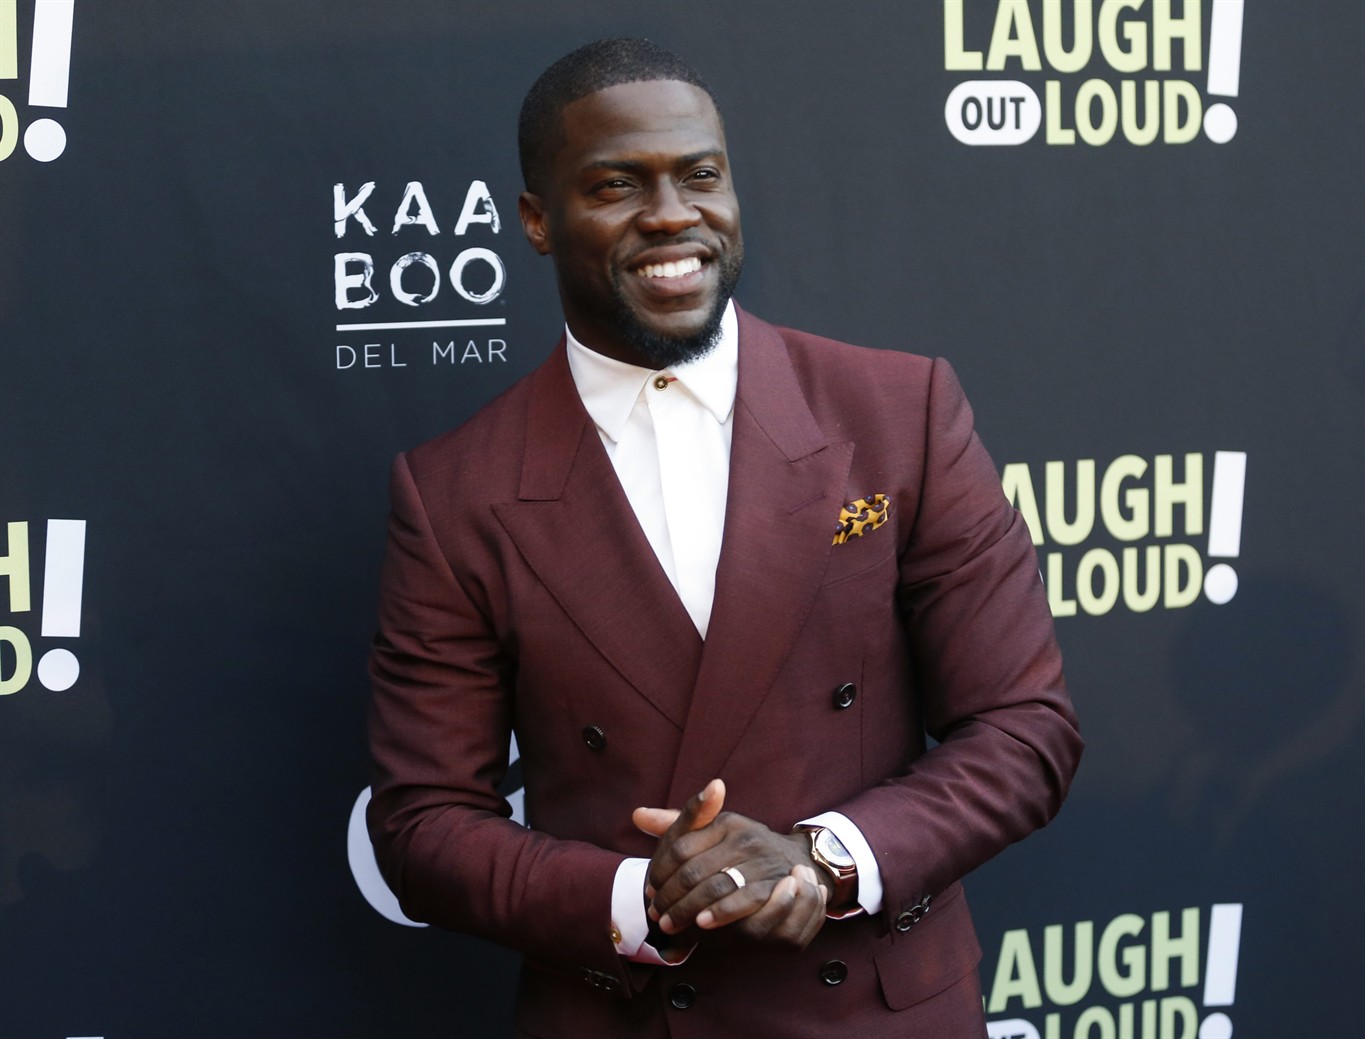 Kevin Hart to Use Cheating Scandal as Material in Upcoming Tour